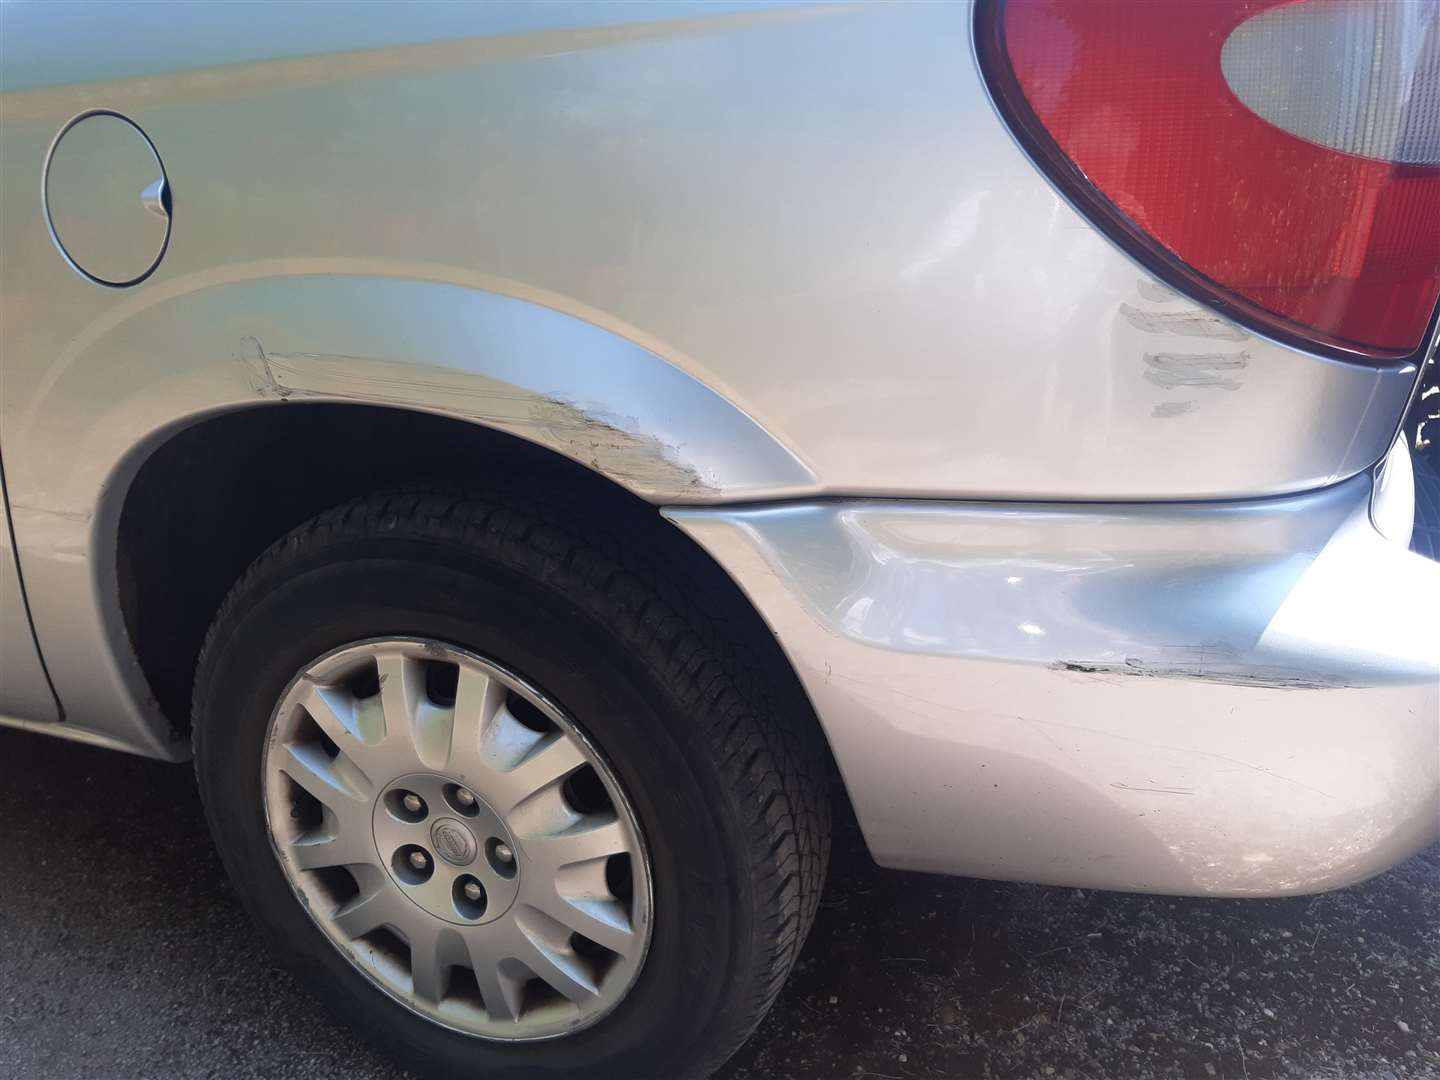 You can get some nasty scrapes leaving your car parked on the street